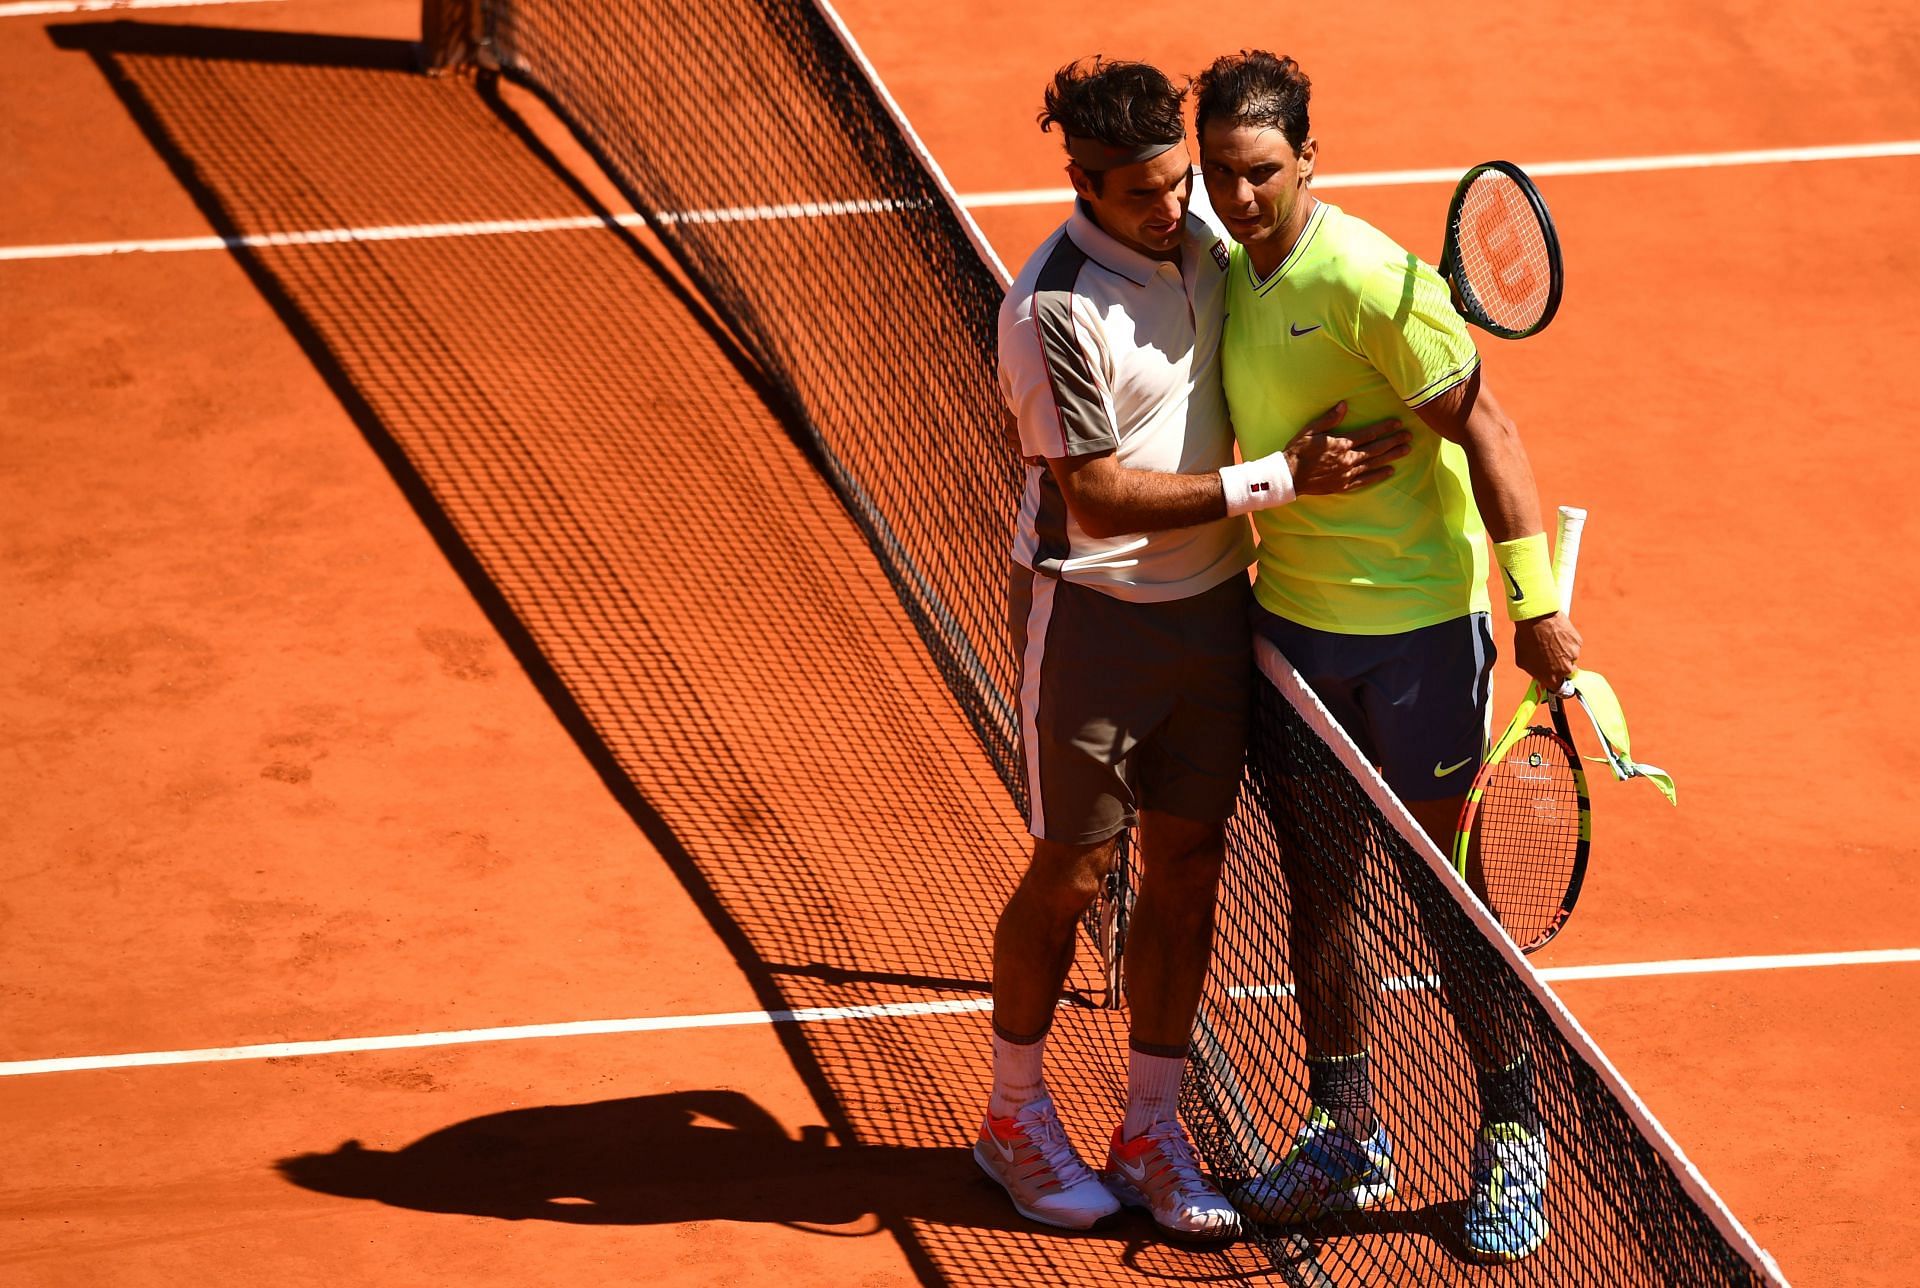 Roger Federer congratulates Rafael Nadal after their 2019 French Open semifinal